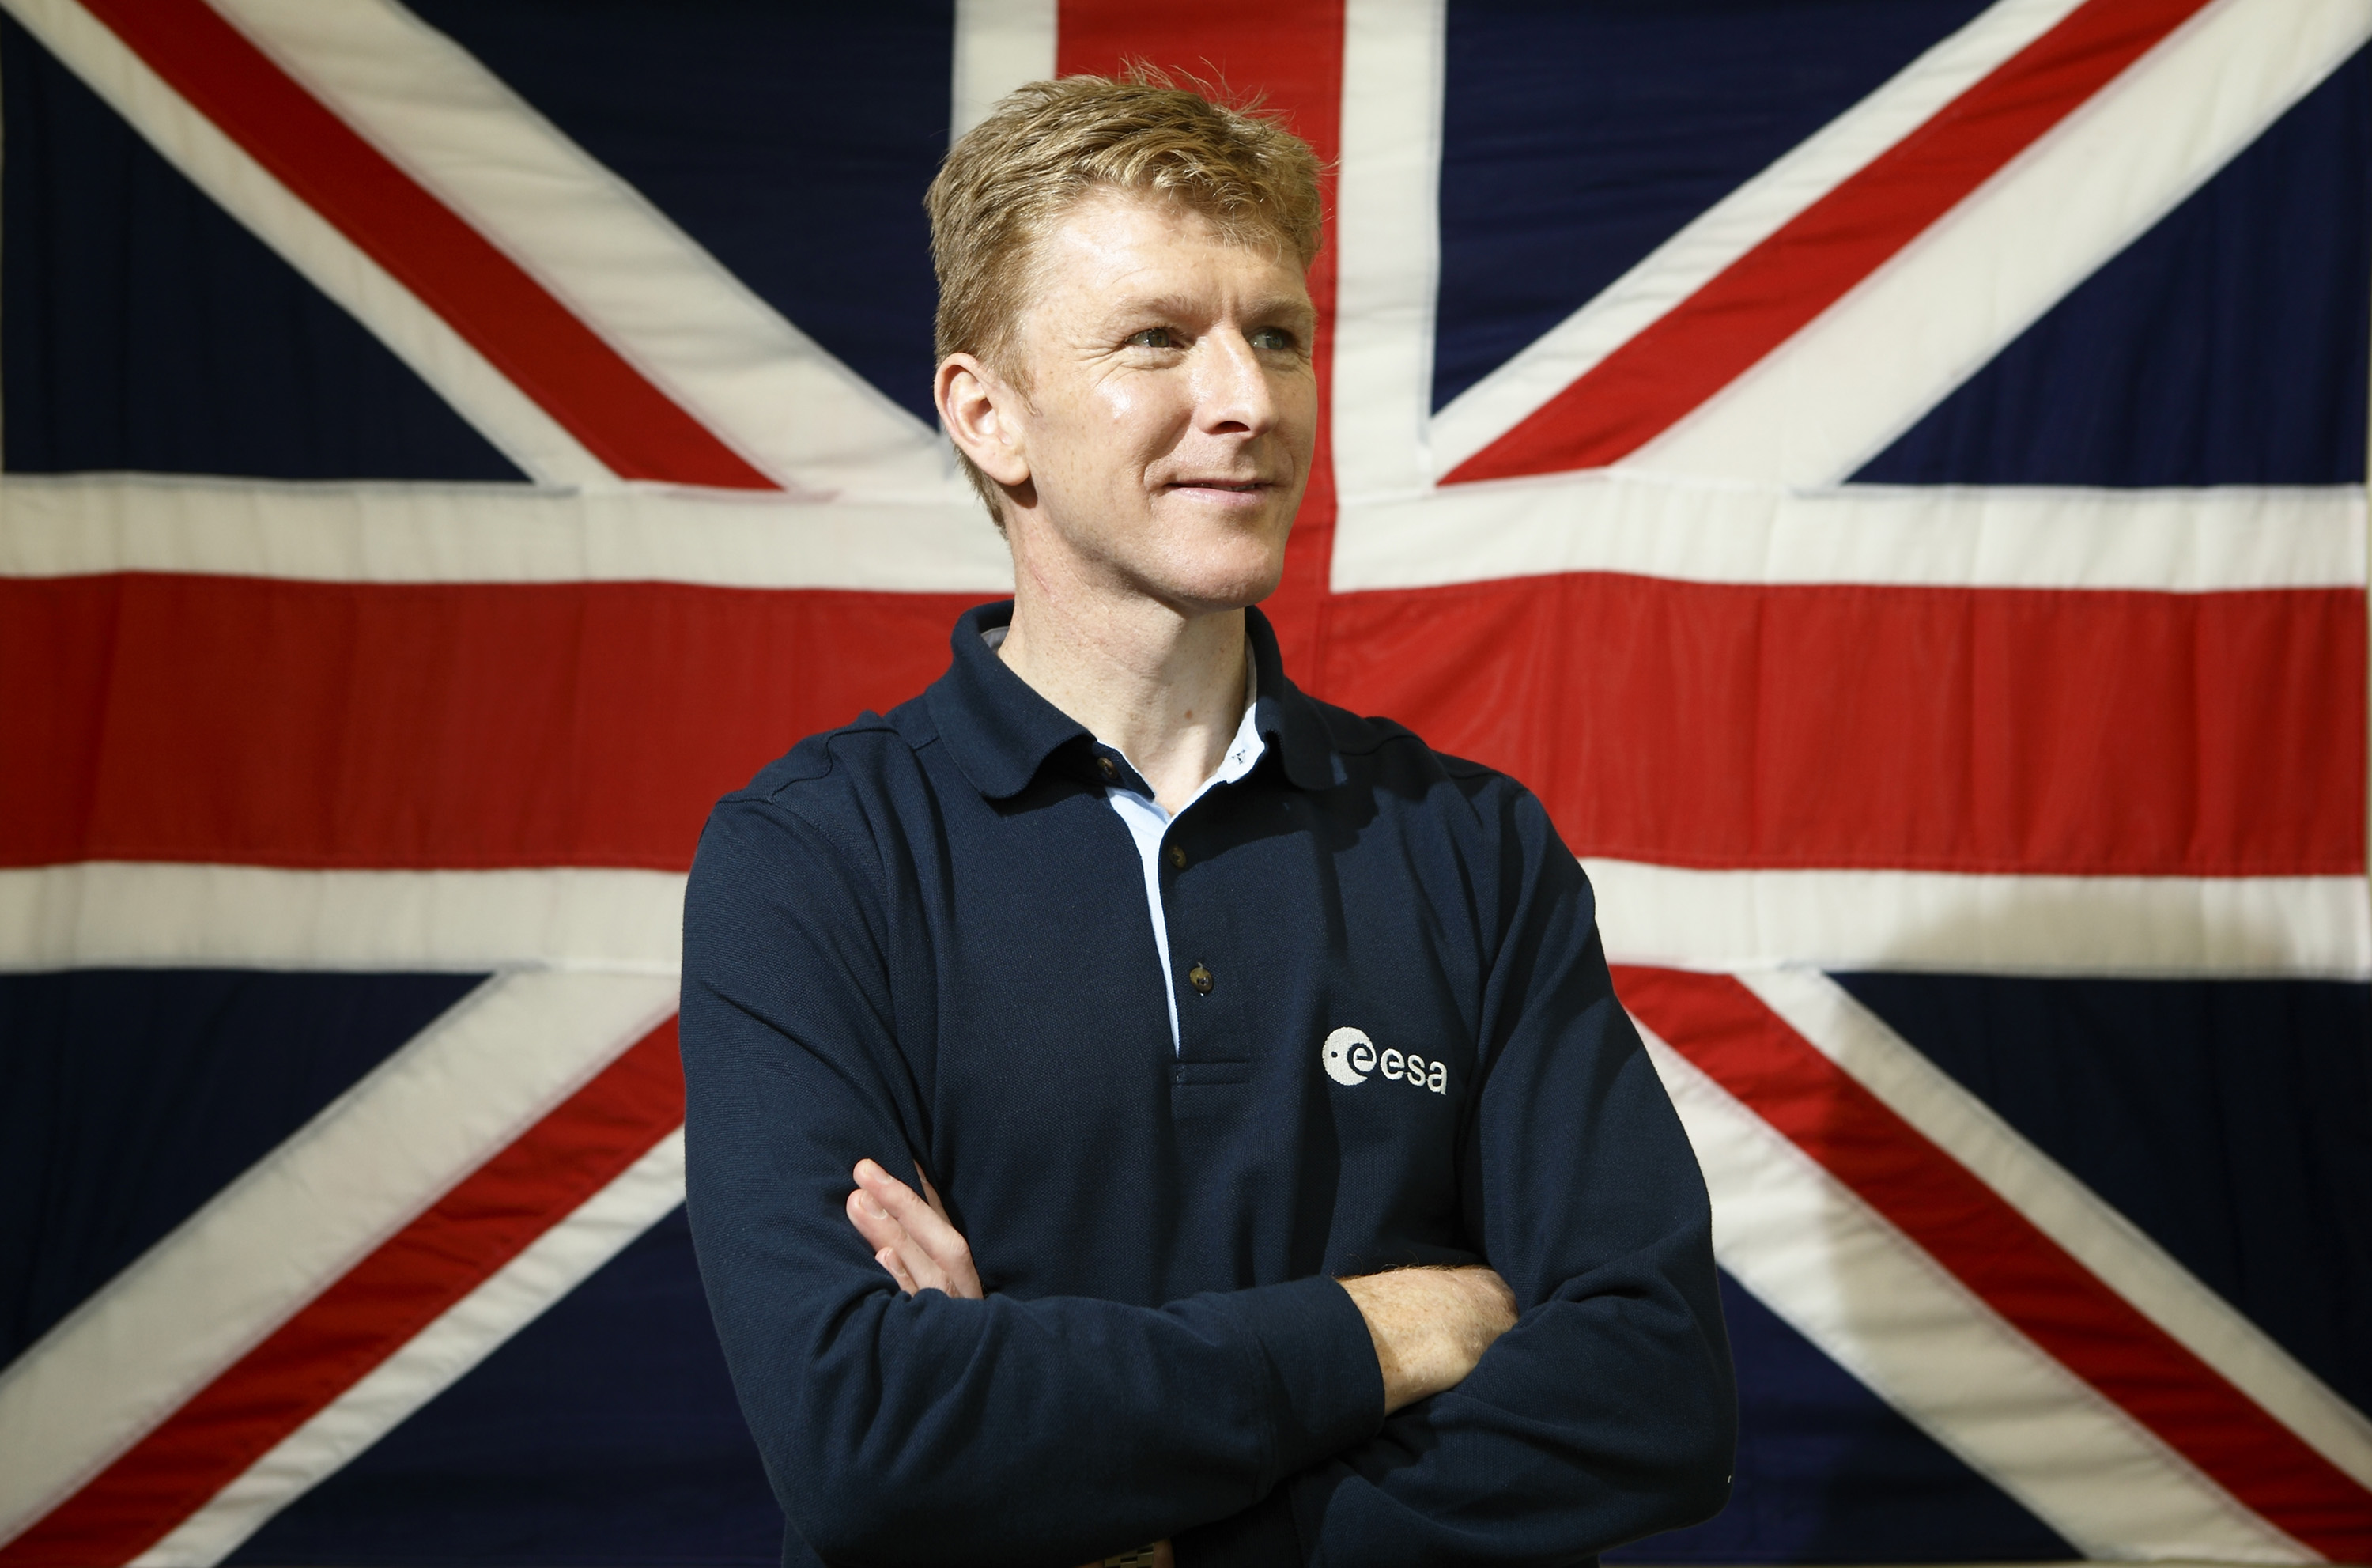 Tim Peake will be the first British astronaut to visit the International Space Station.